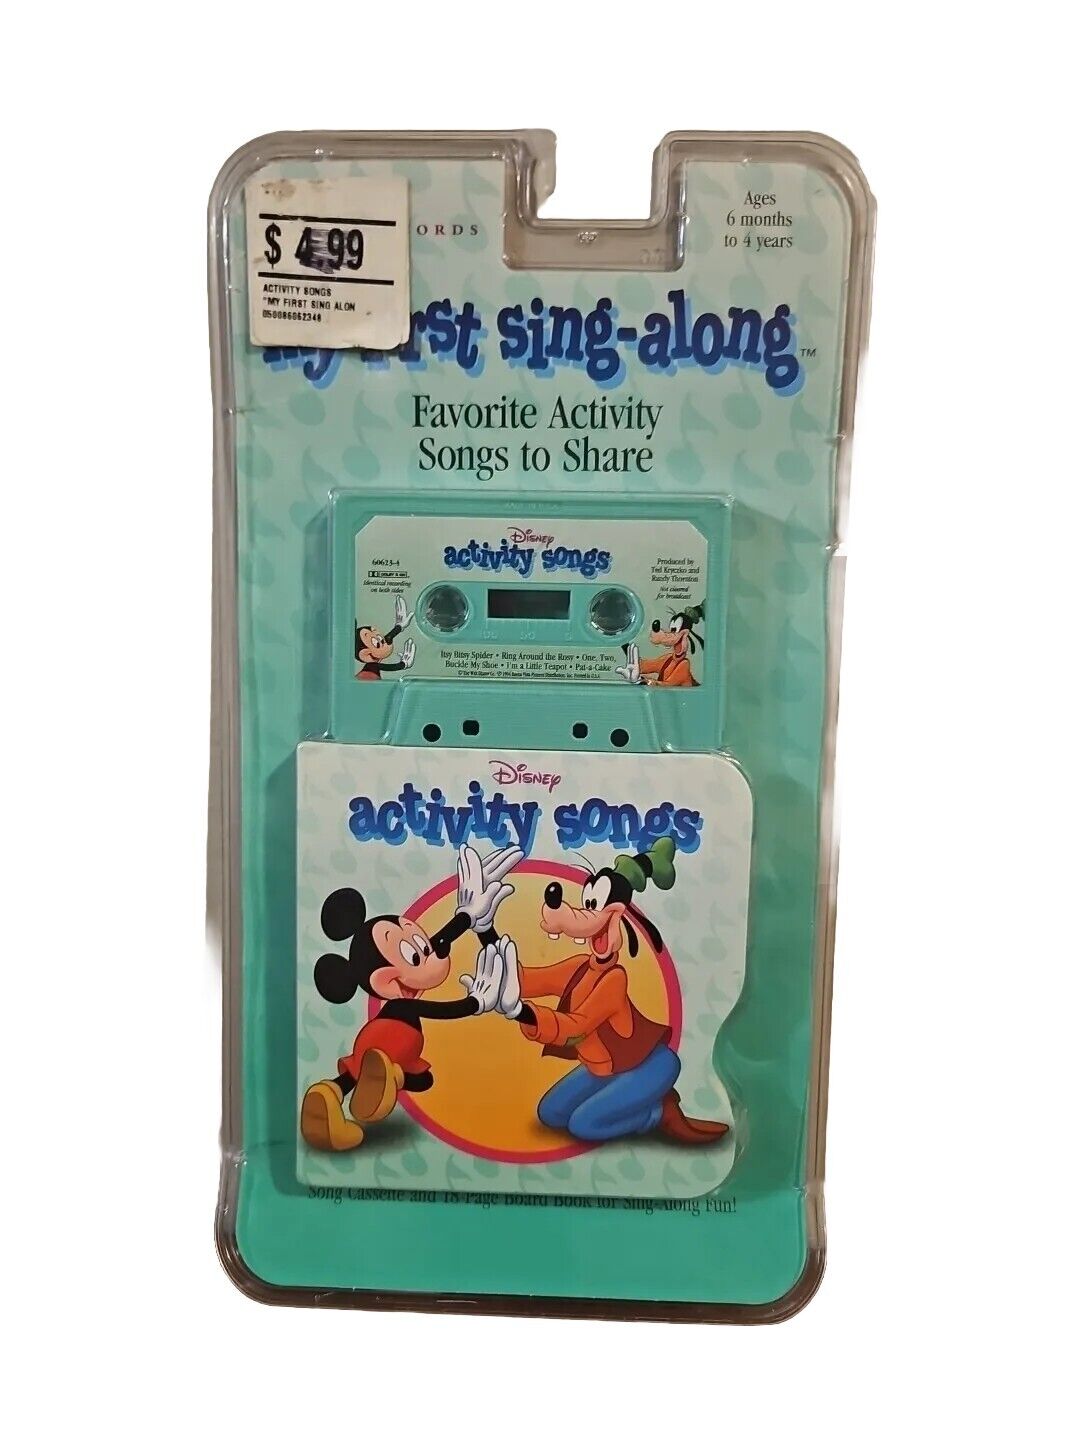 My First Sing-Along Favorite Activity Songs Disney Cassette Tape Songbook - NEW